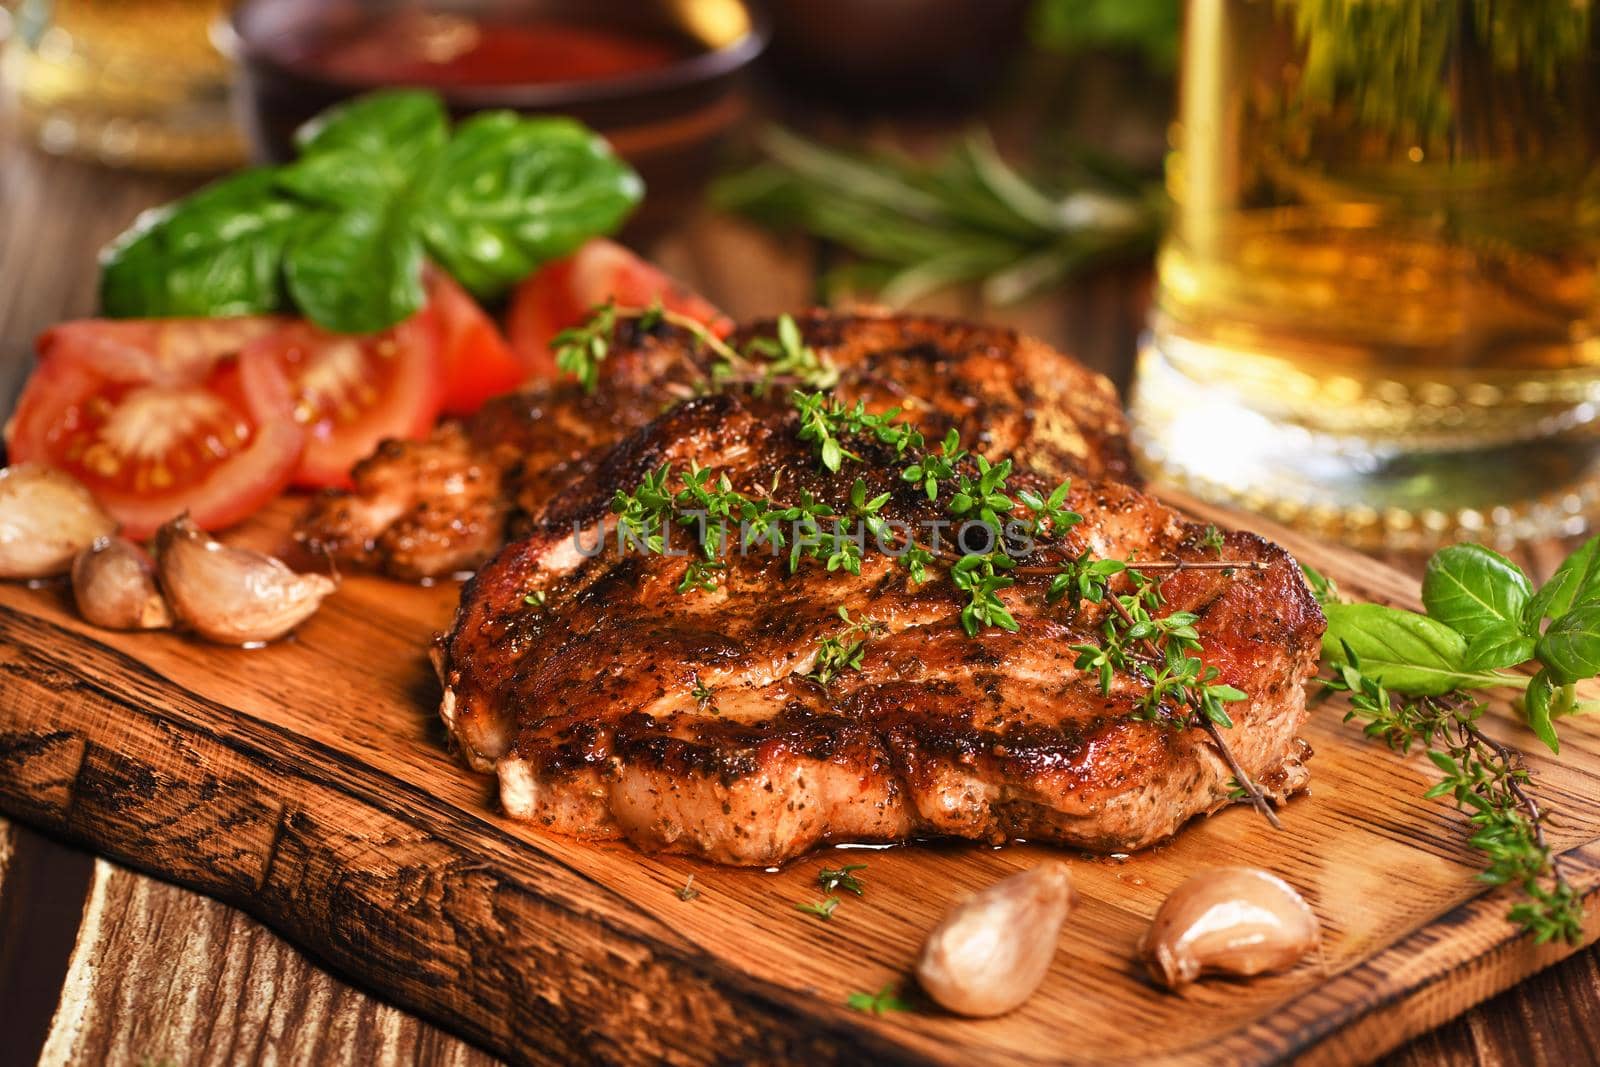  Fried pork steak on a wooden board to serve with vegetables and a mug of beer.